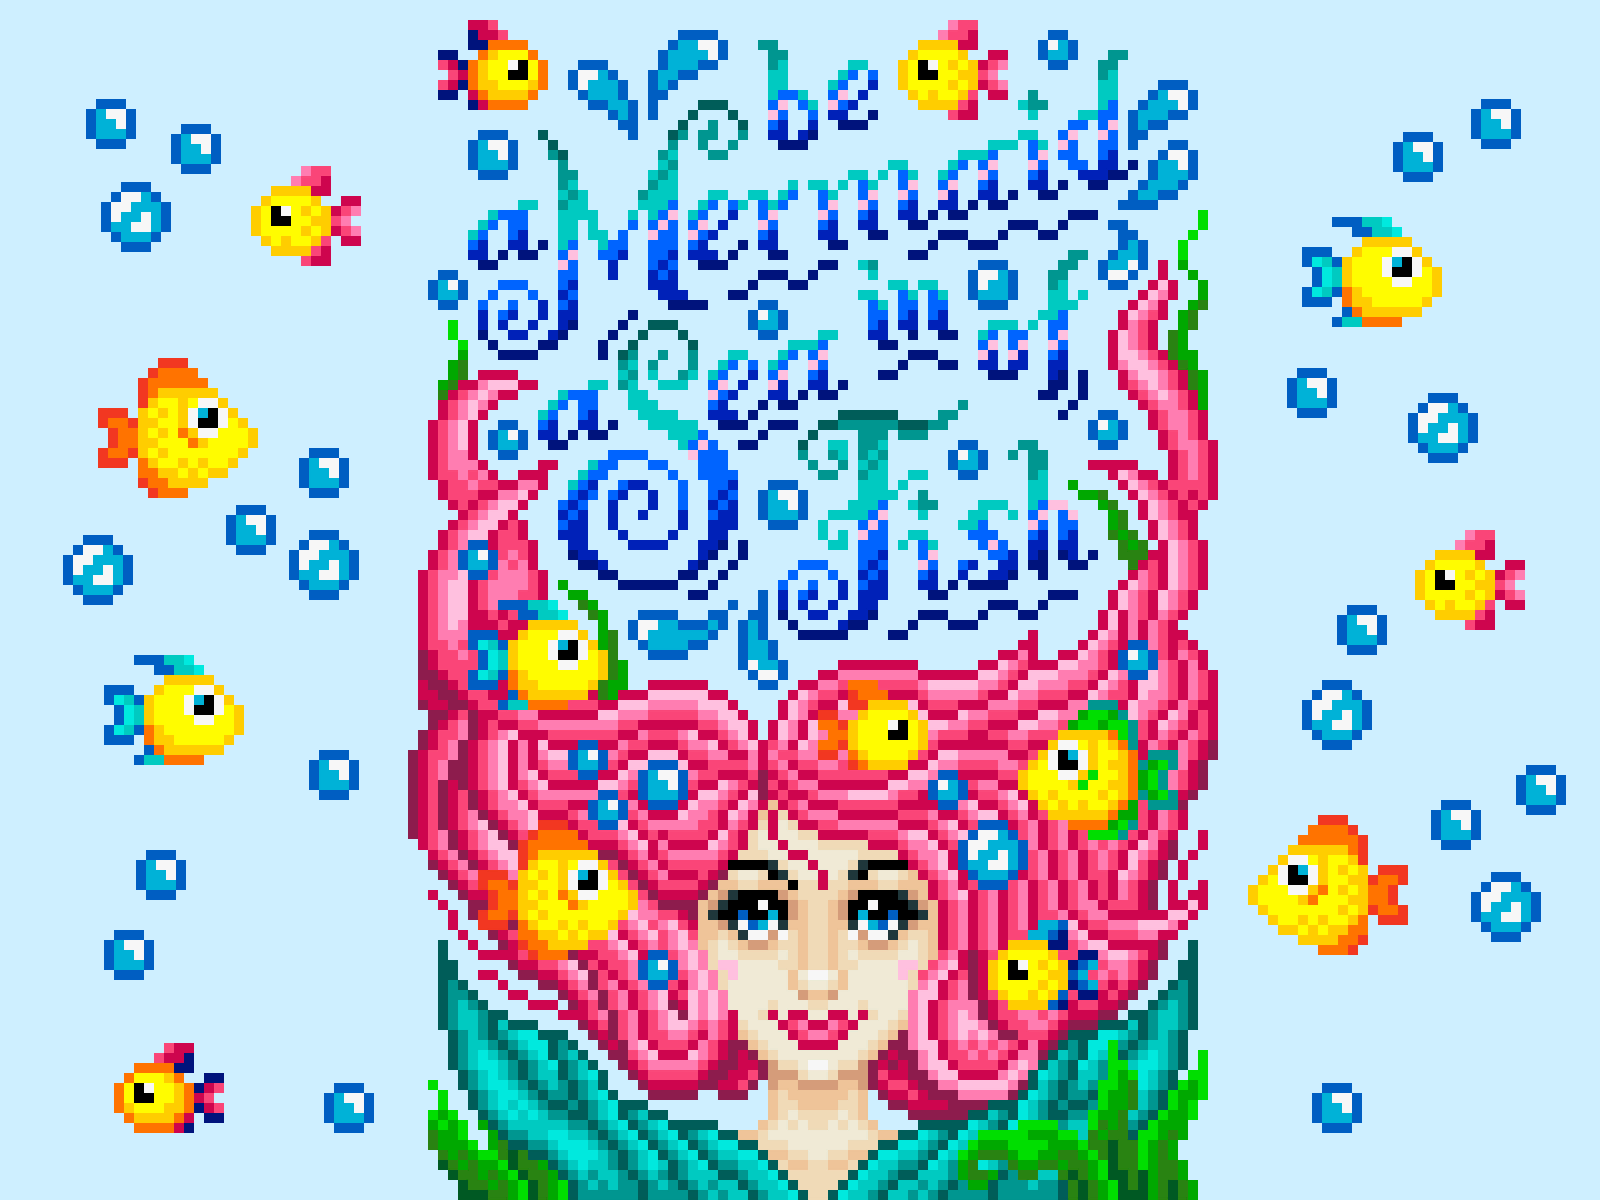 Be a Mermaid in a Sea of Fish digital illustration character design character pink hair girl blue fishes sea mermaid gif animation pixel perfect pixel artist pixel art pixels design illustration graphic design gif